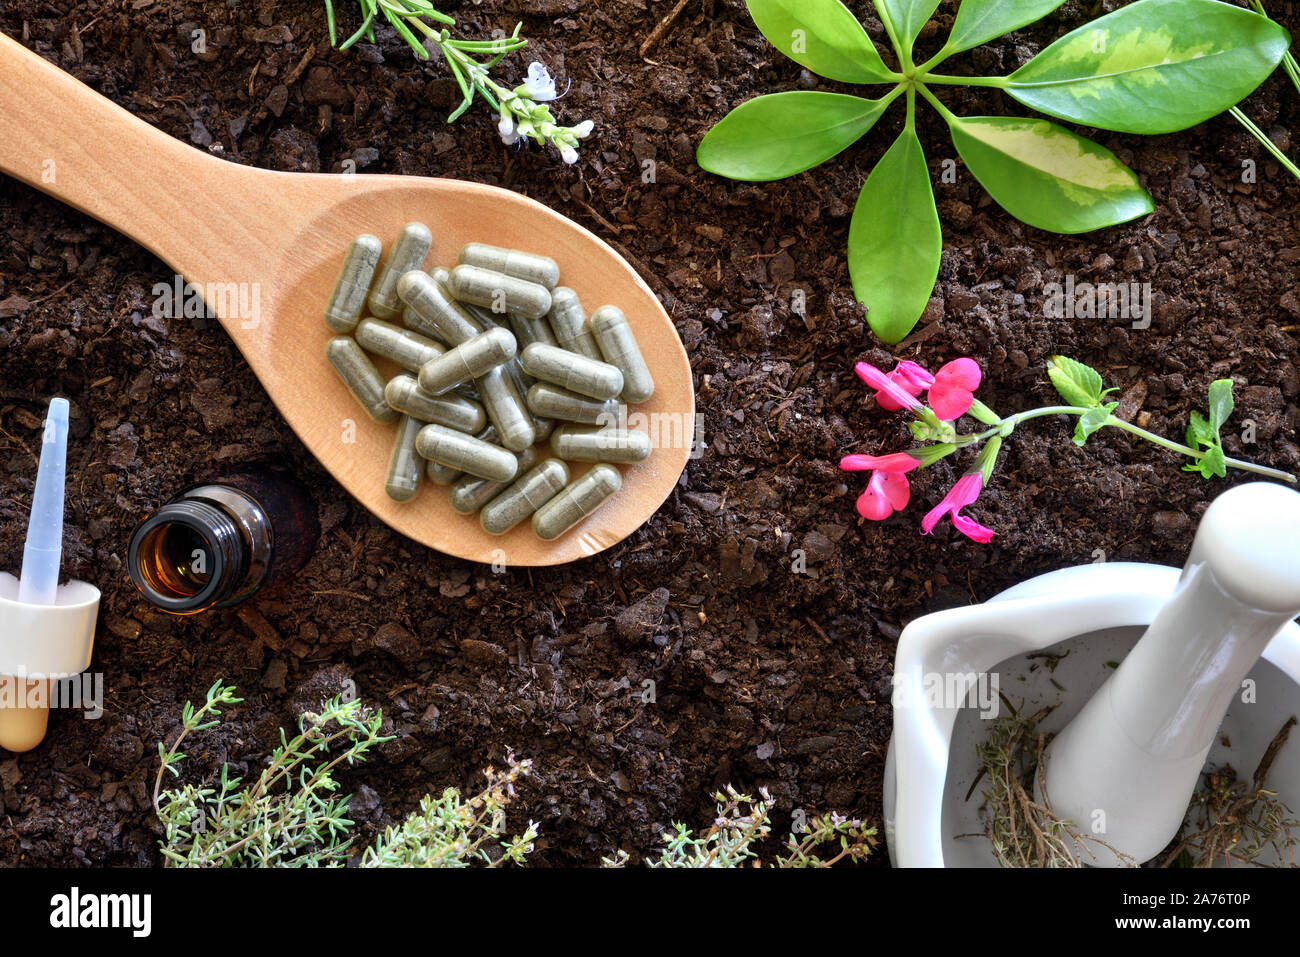 Elaboration of natural plant medicine with mortar, wooden spoon with capsules, dropper bottle and plants on soil. Alternative natural medicine concept Stock Photo